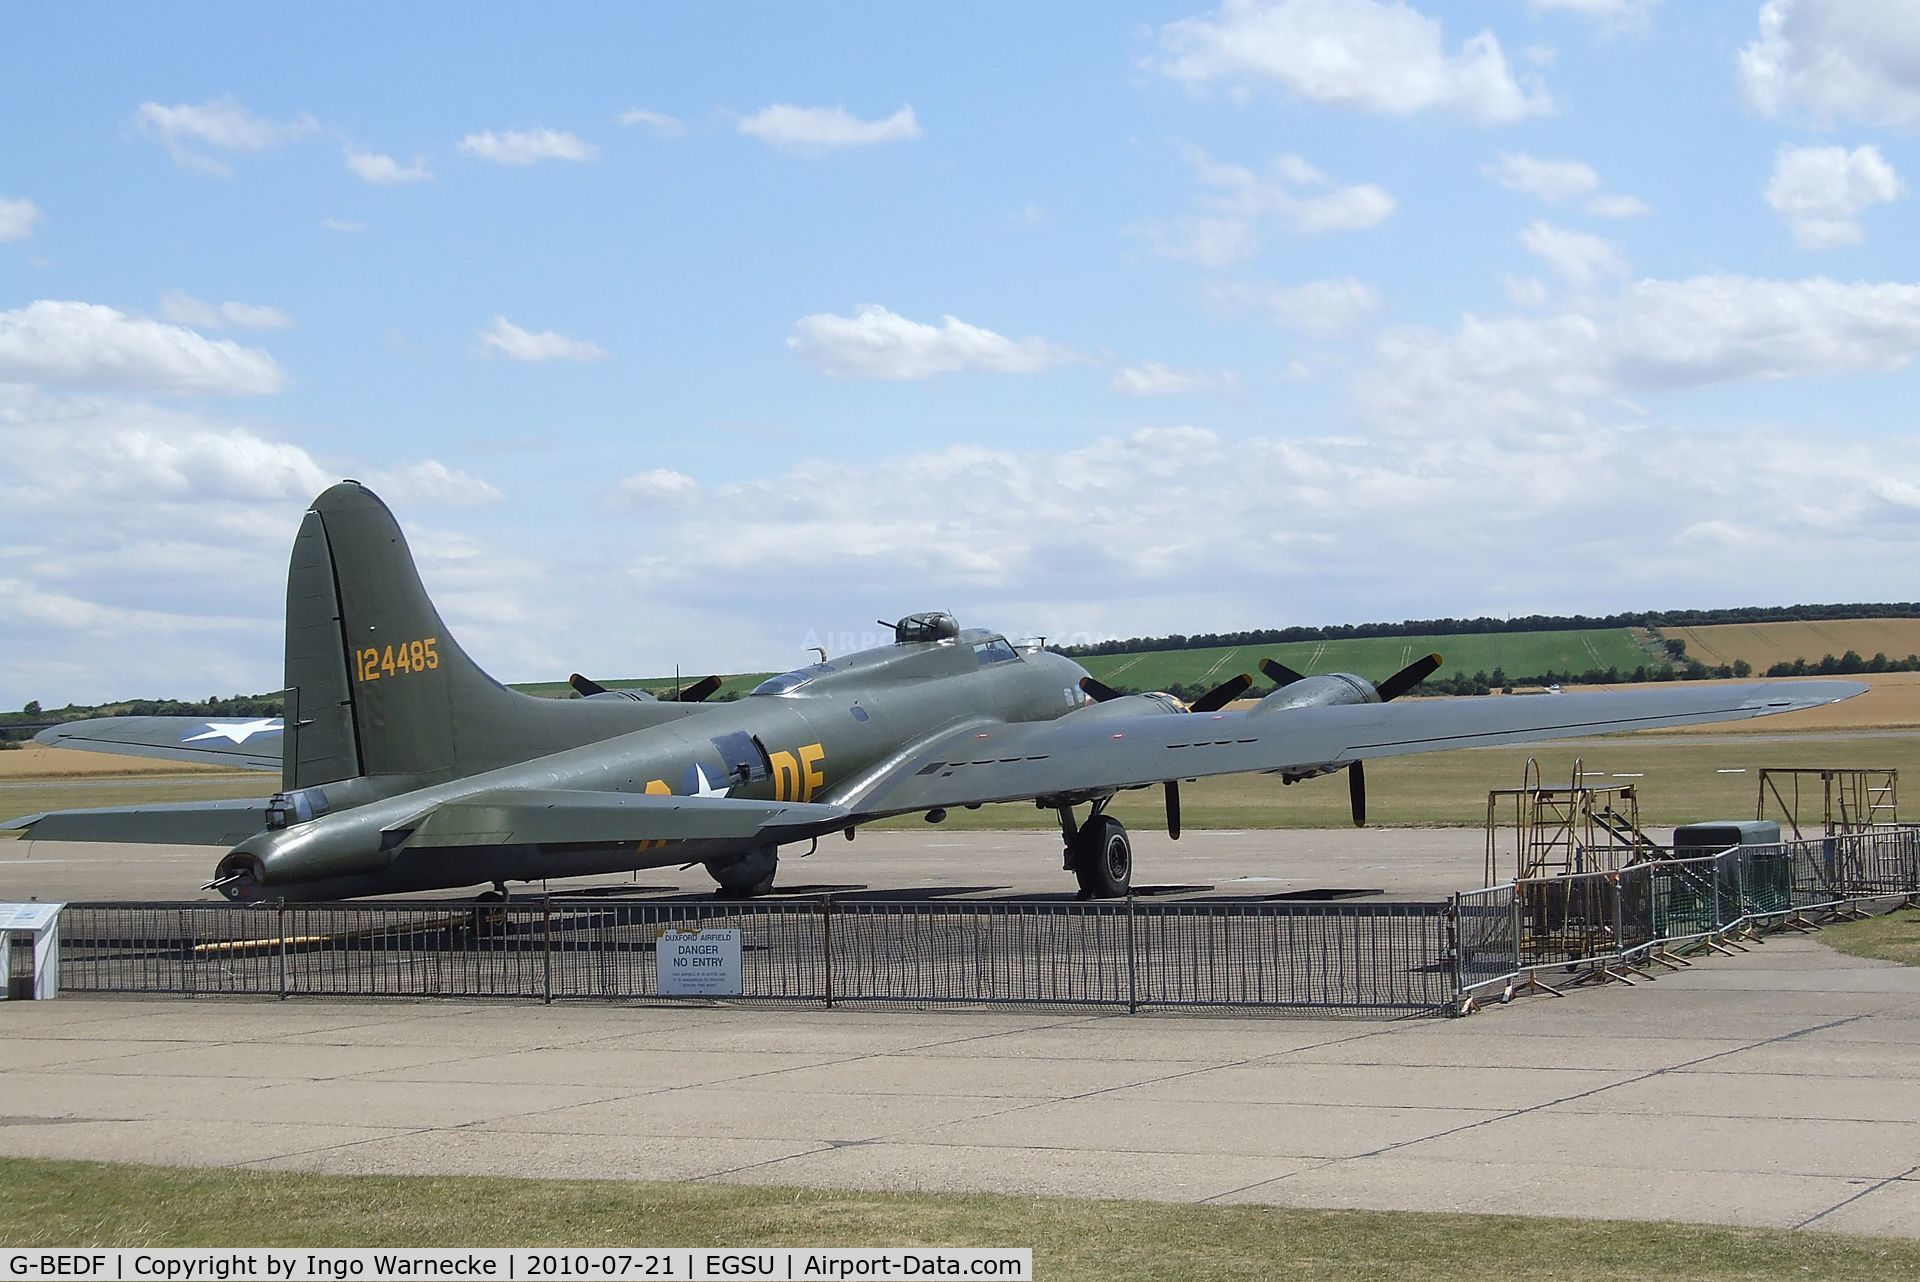 G-BEDF, 1944 Boeing B-17G Flying Fortress C/N 8693, Boeing B-17G Flying Fortress at Duxford airfield